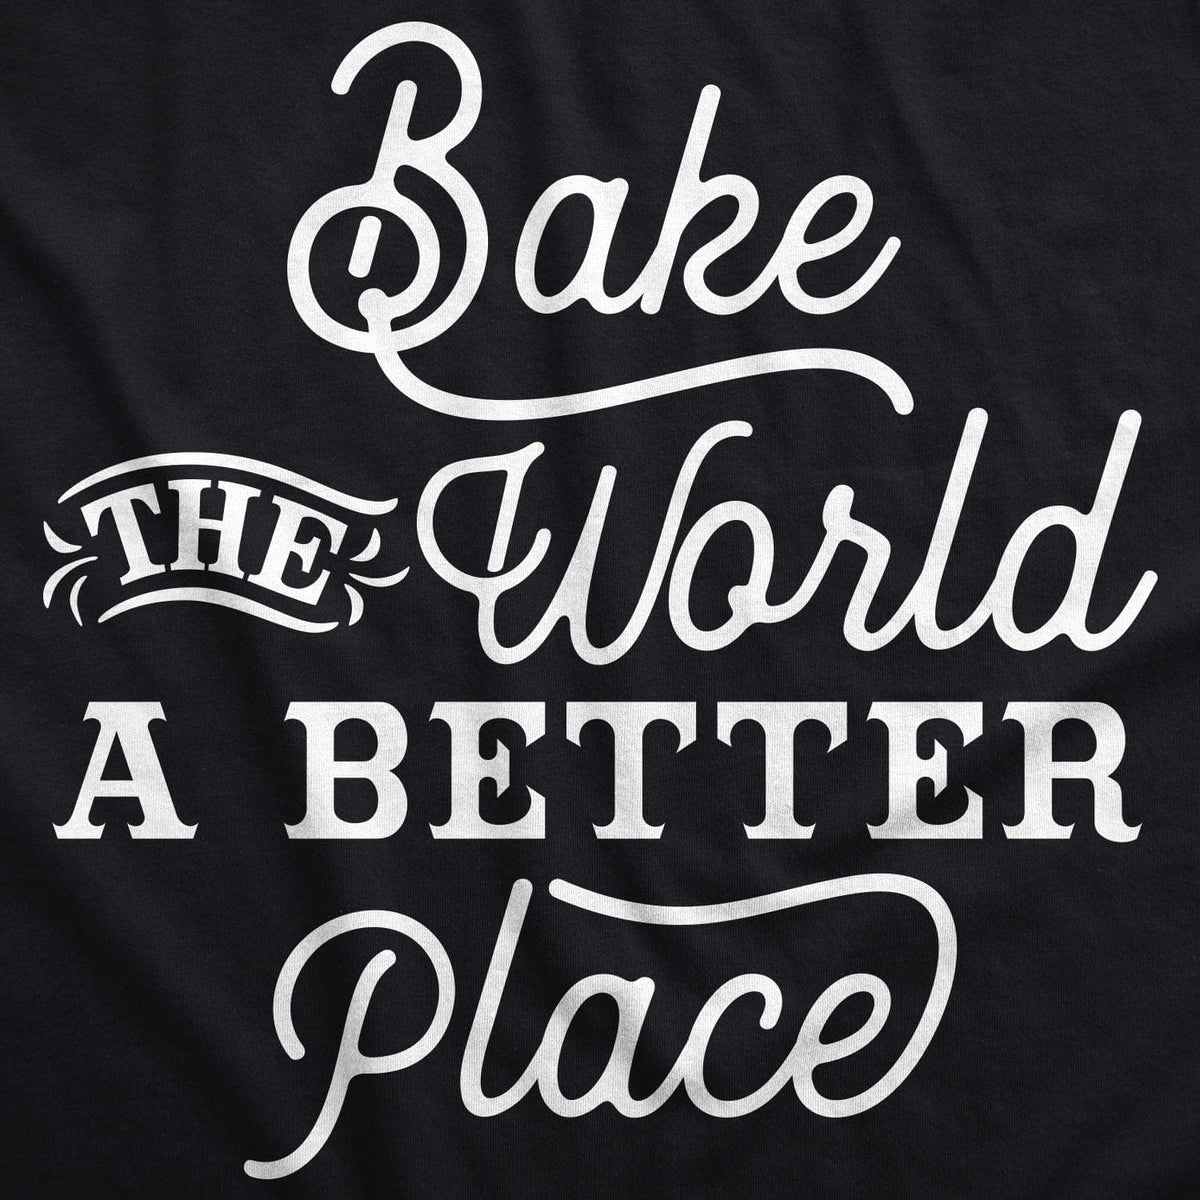 Bake The World A Better Place Cookout Apron - Crazy Dog T-Shirts